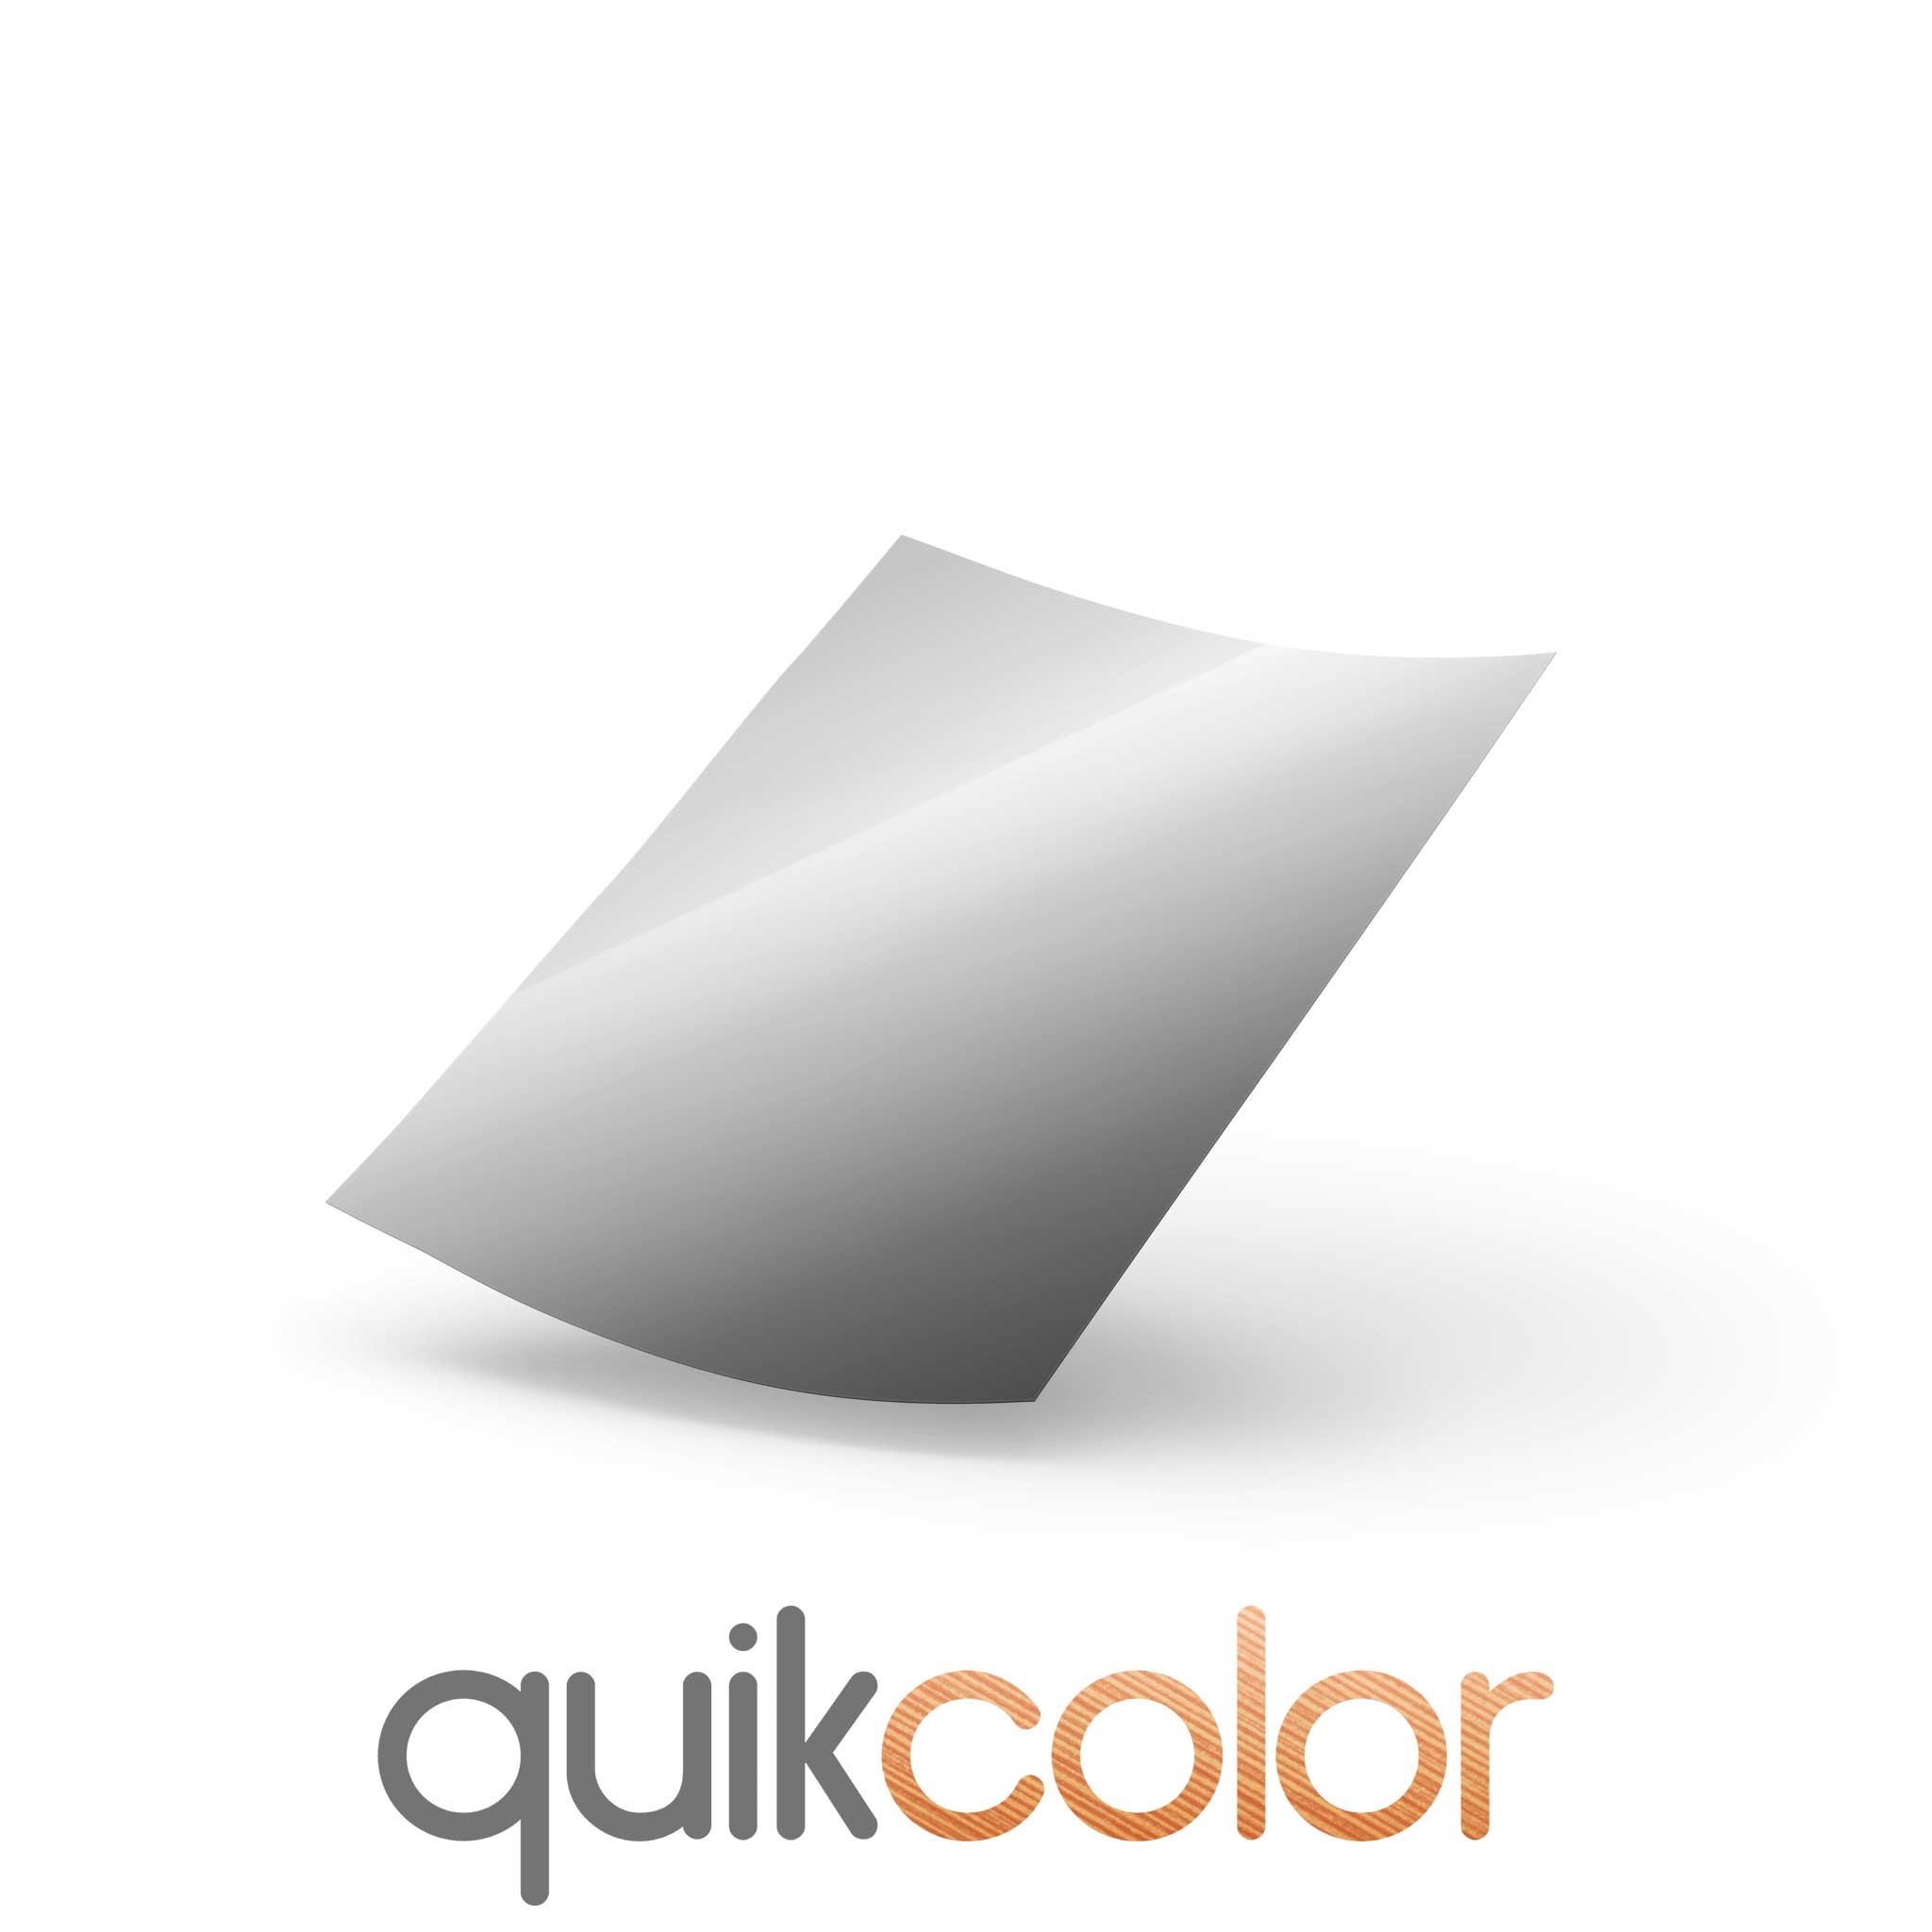 Quikcolor Metallic Hard Surface 1-Step Transfer Media for Cardboard, Paper and Wood - 0